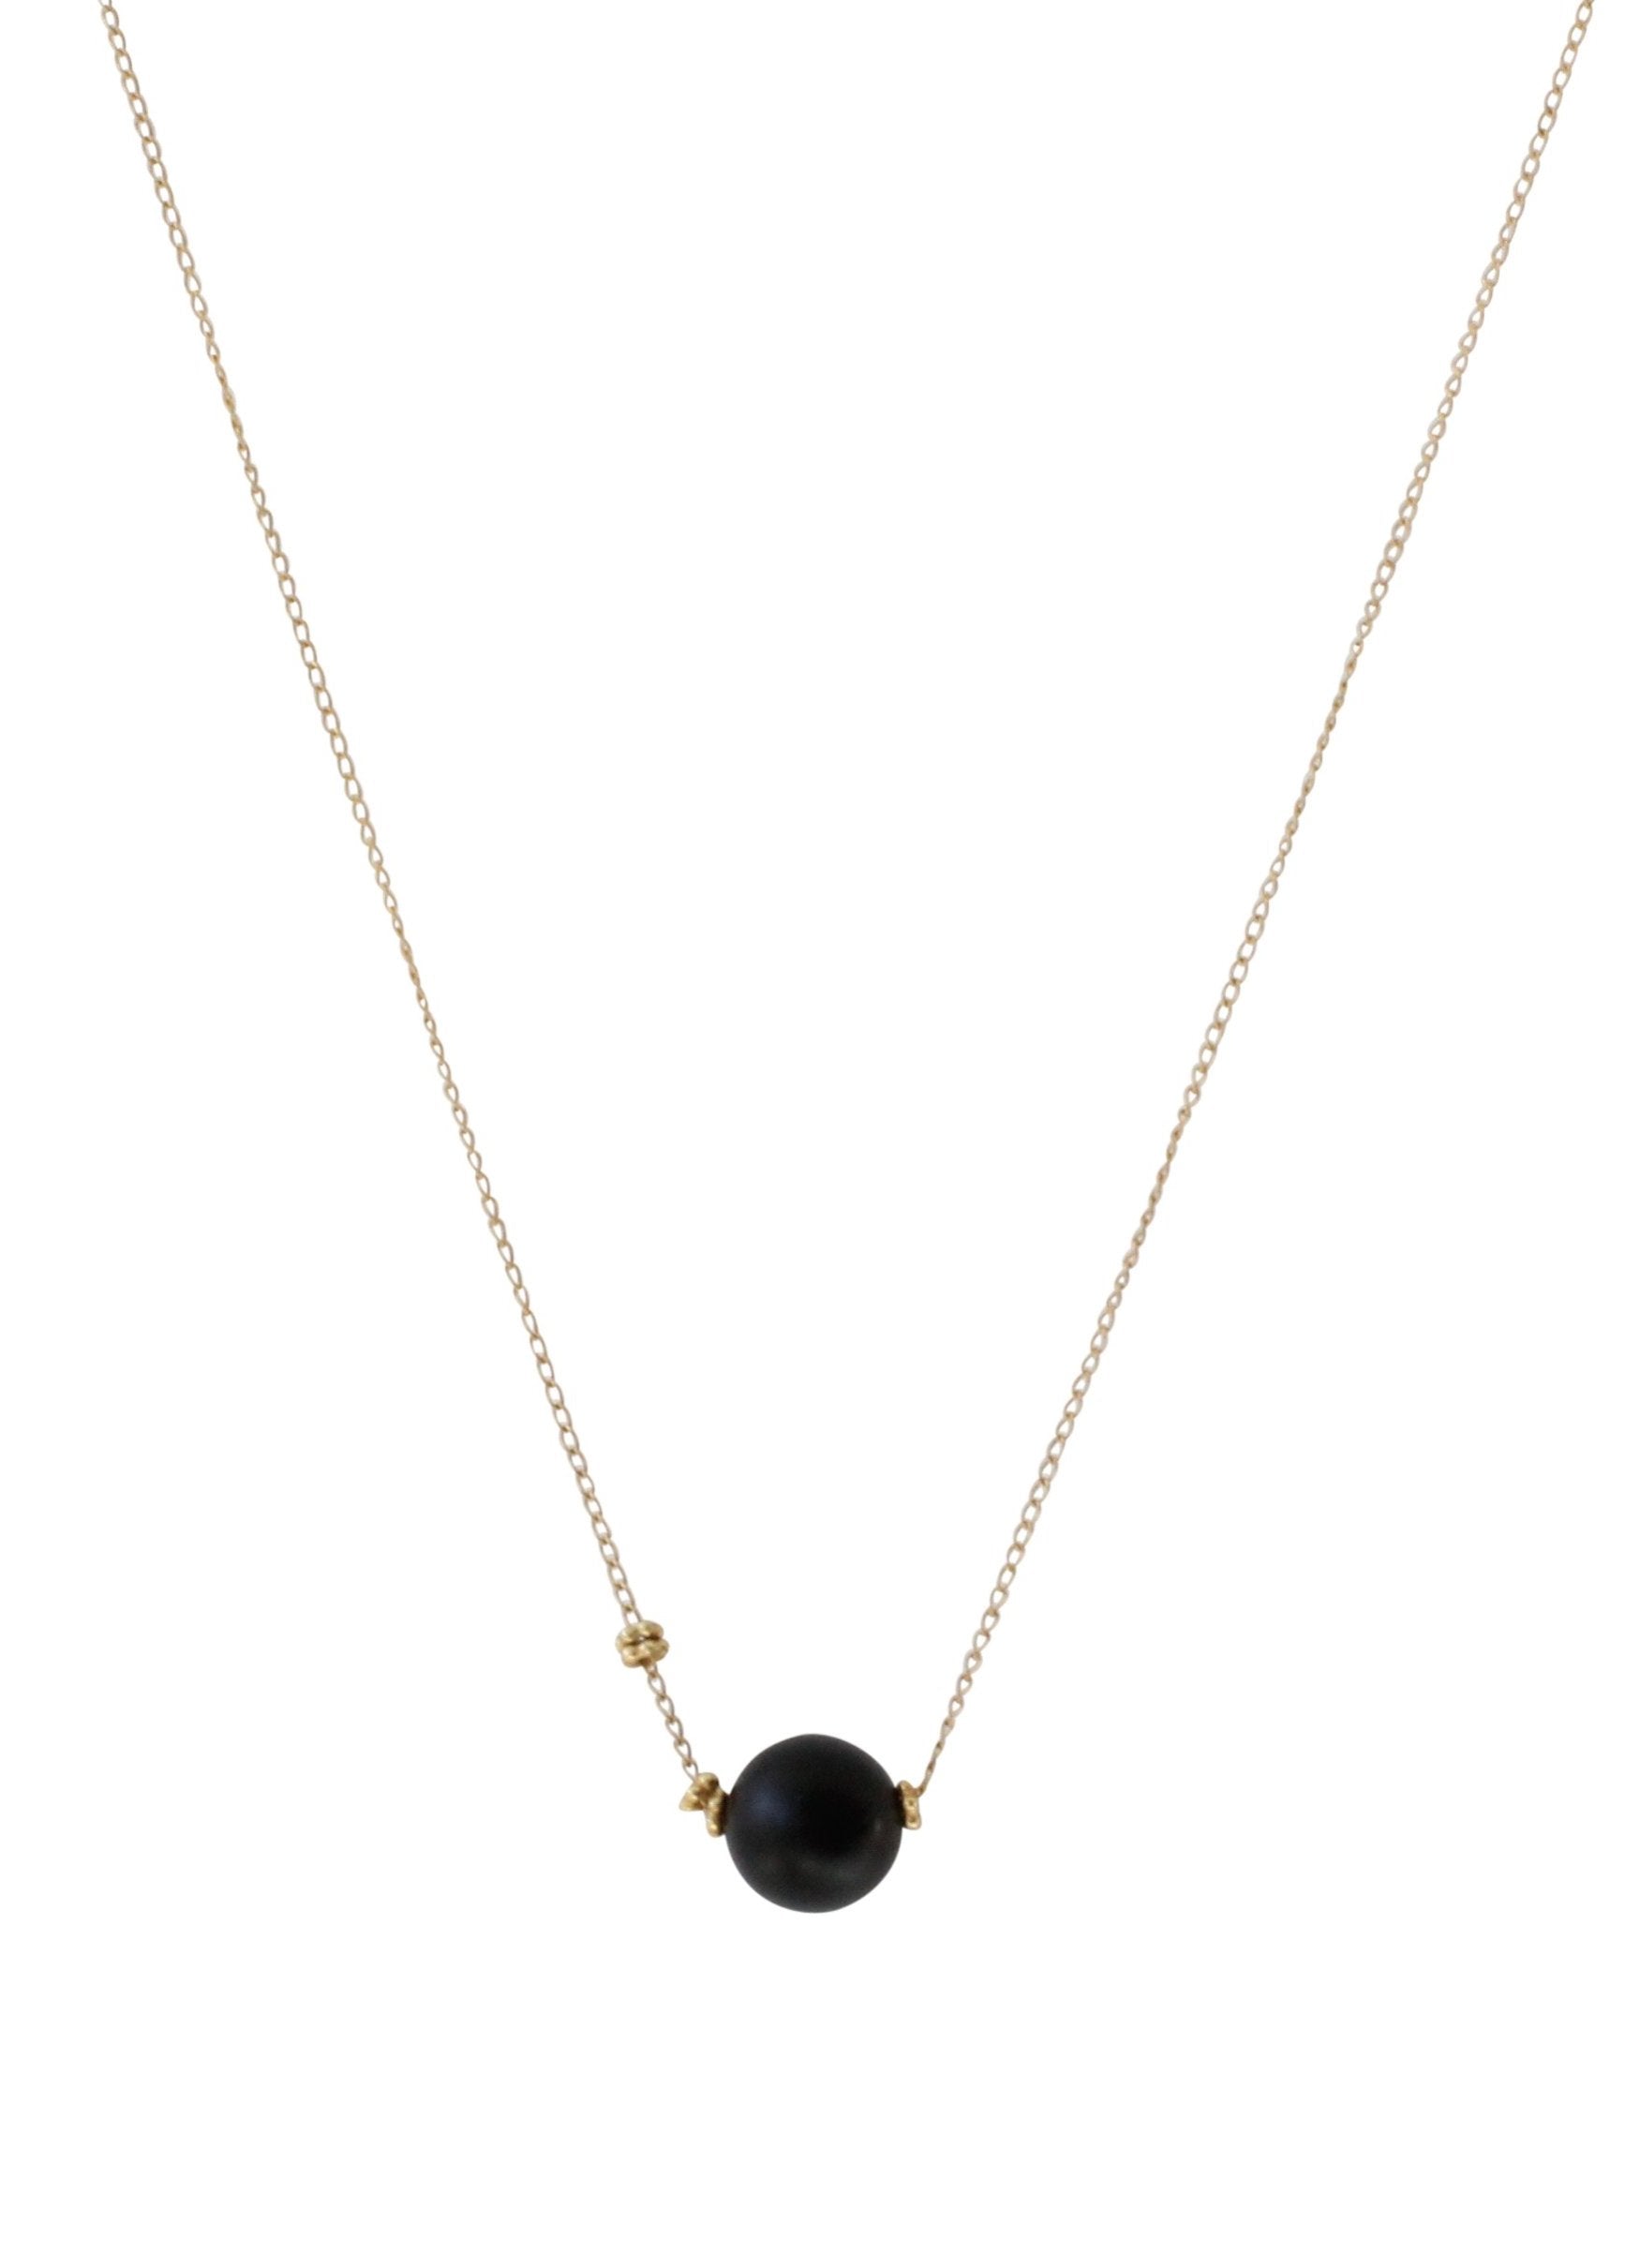 Simple Ball Drop Necklace in Black Onyx